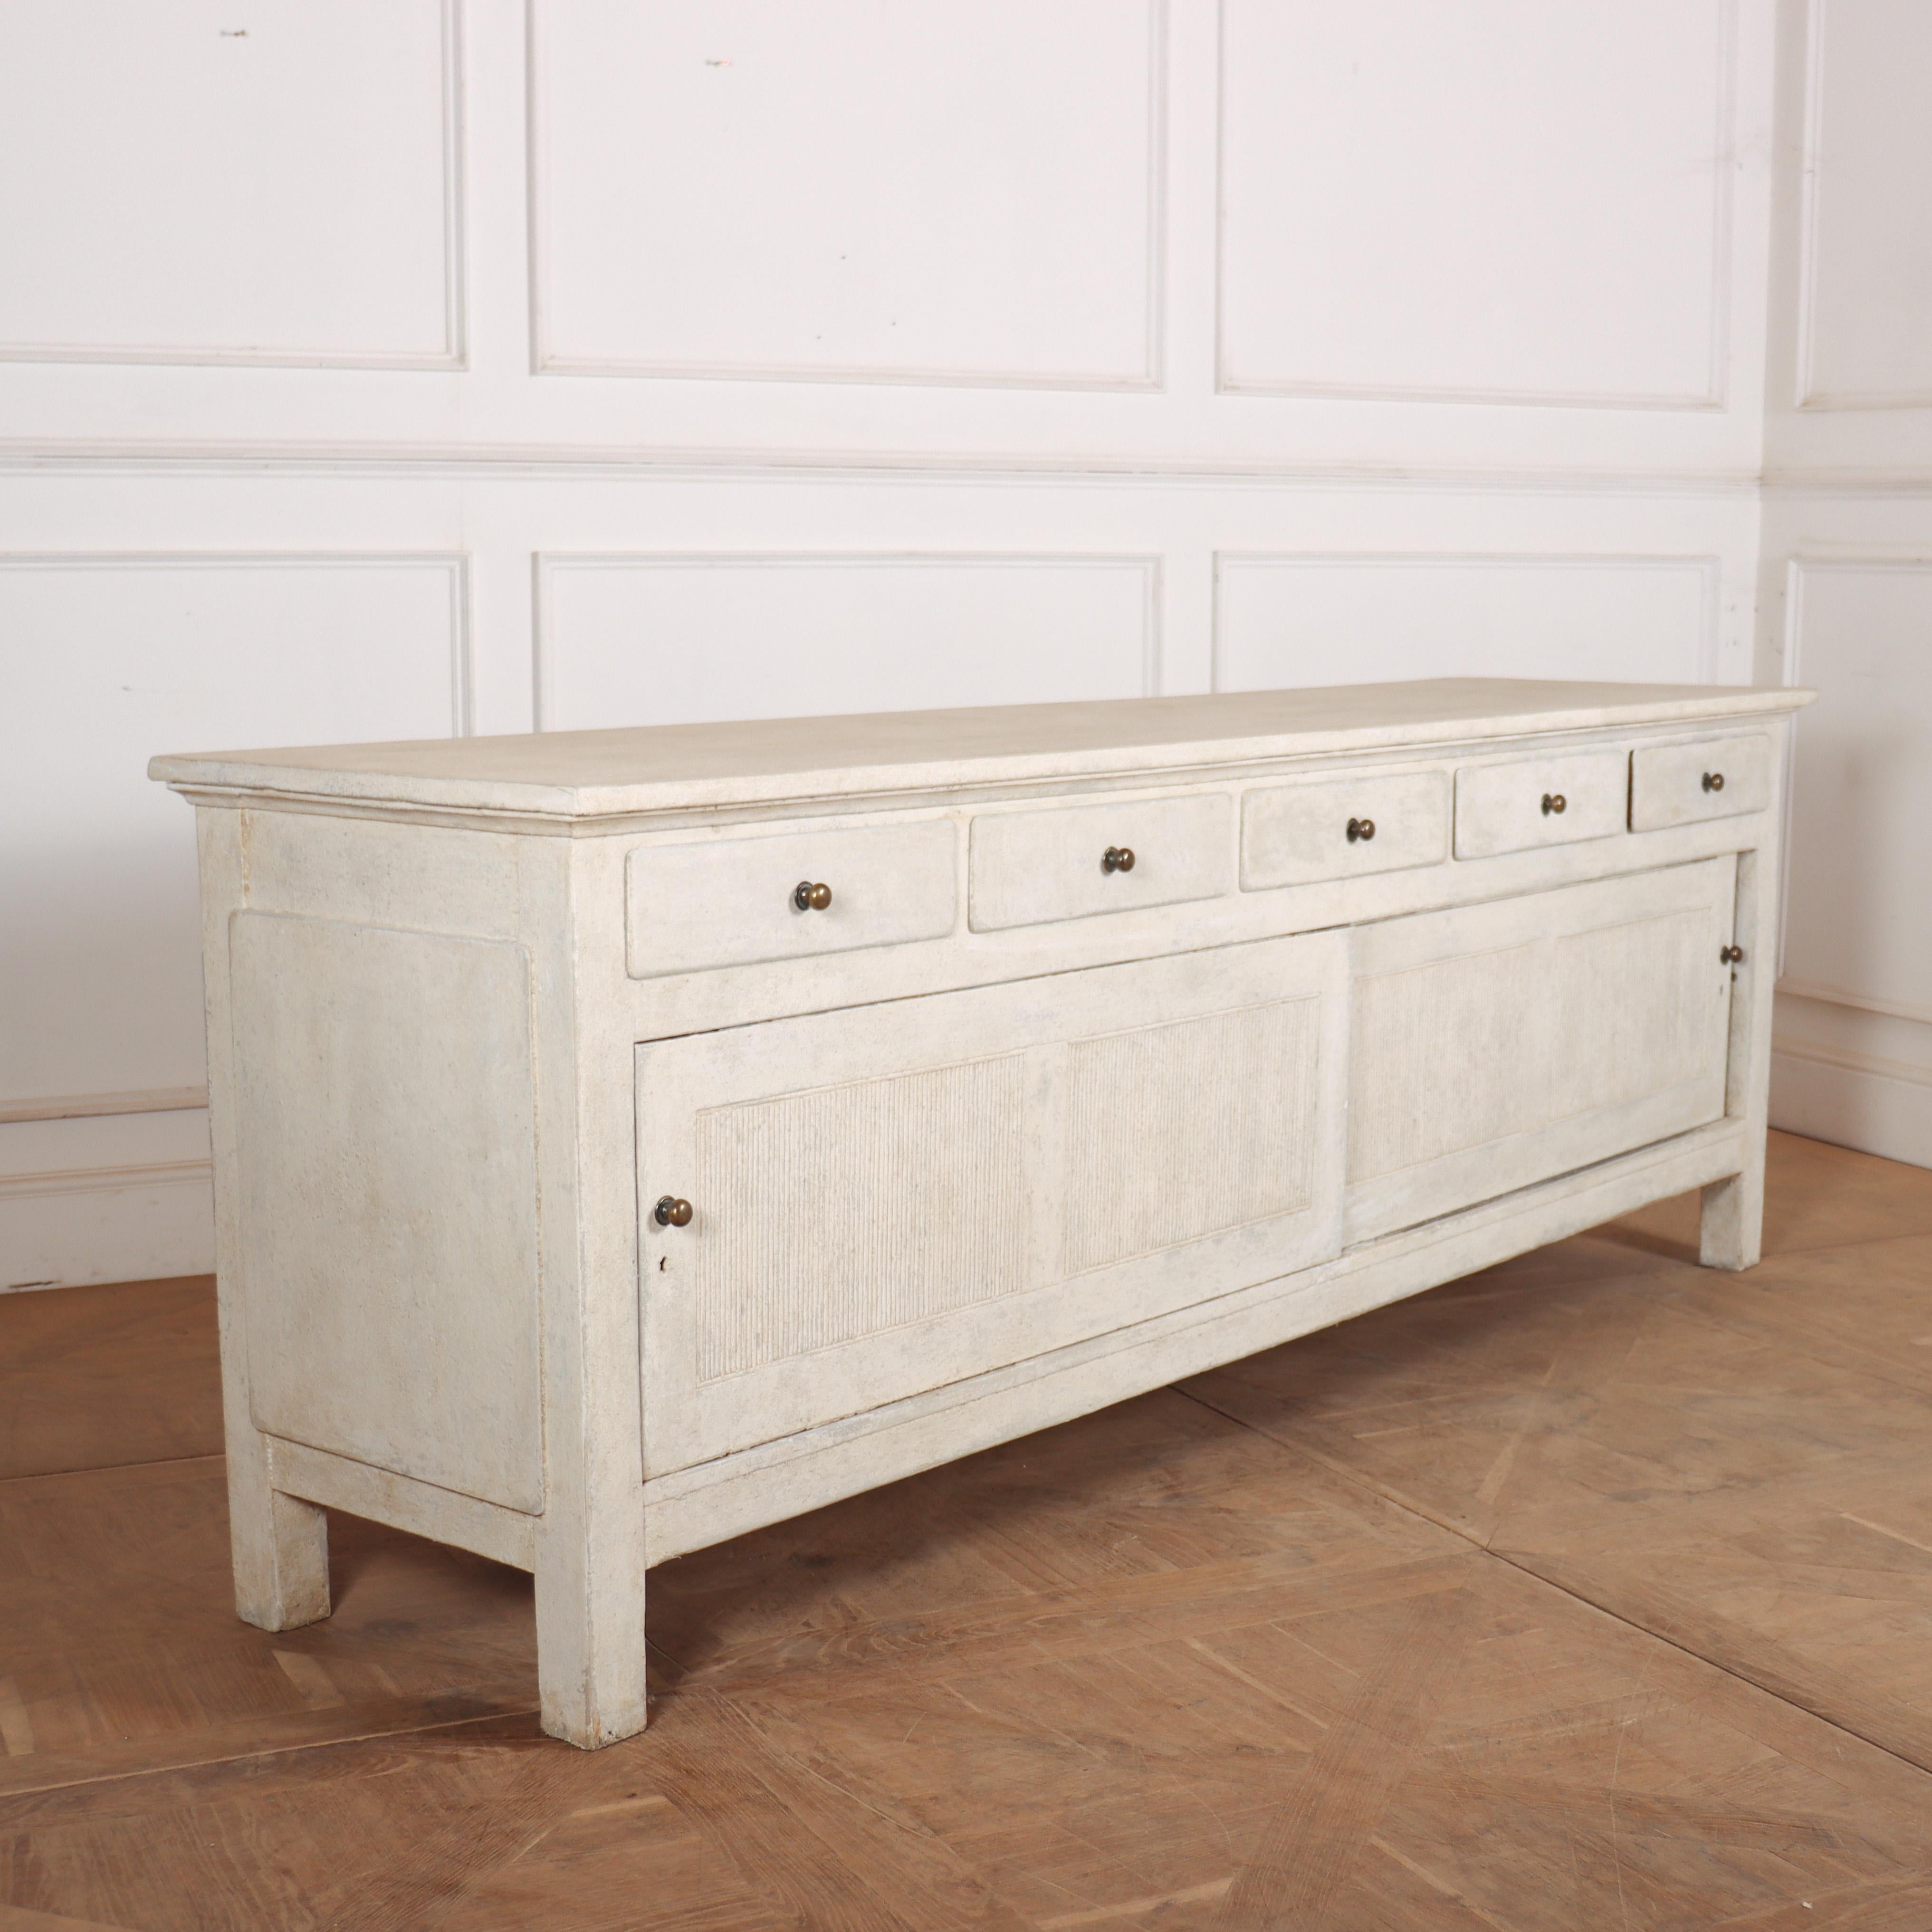 Large 19th C Swedish style painted pine dresser base with reeded doors. 1890.

Reference: 8370

Dimensions
95.5 inches (243 cms) Wide
24 inches (61 cms) Deep
34 inches (86 cms) High